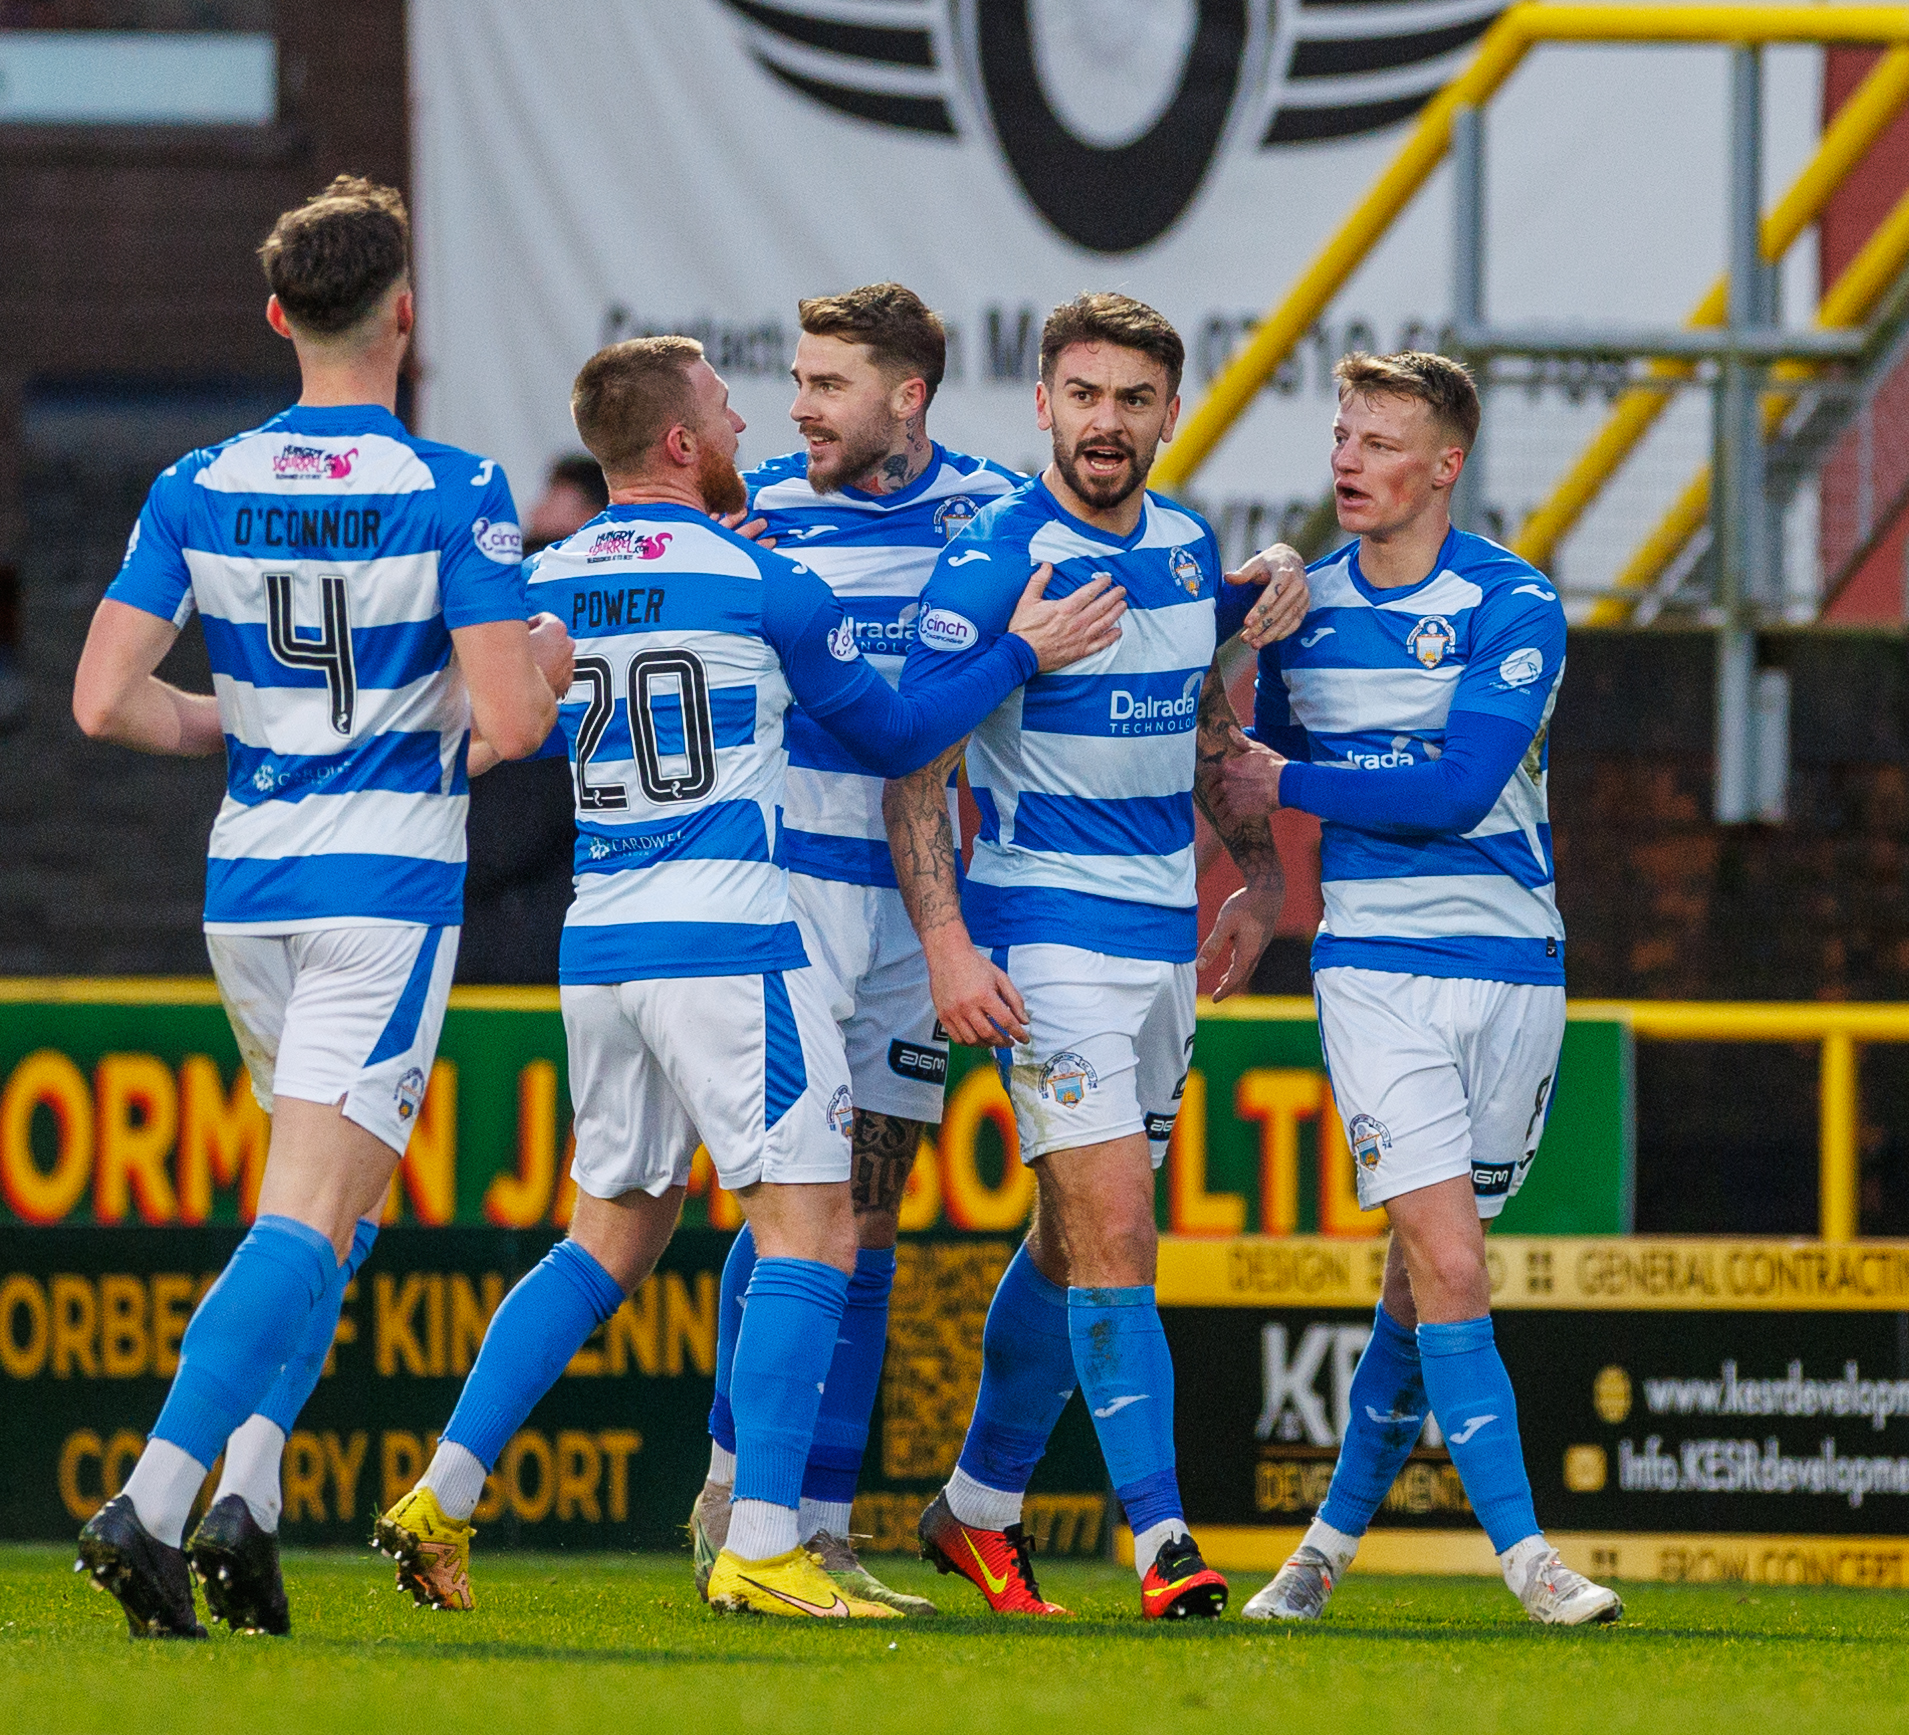 George Oakley could be leaving Morton for Partick Thistle